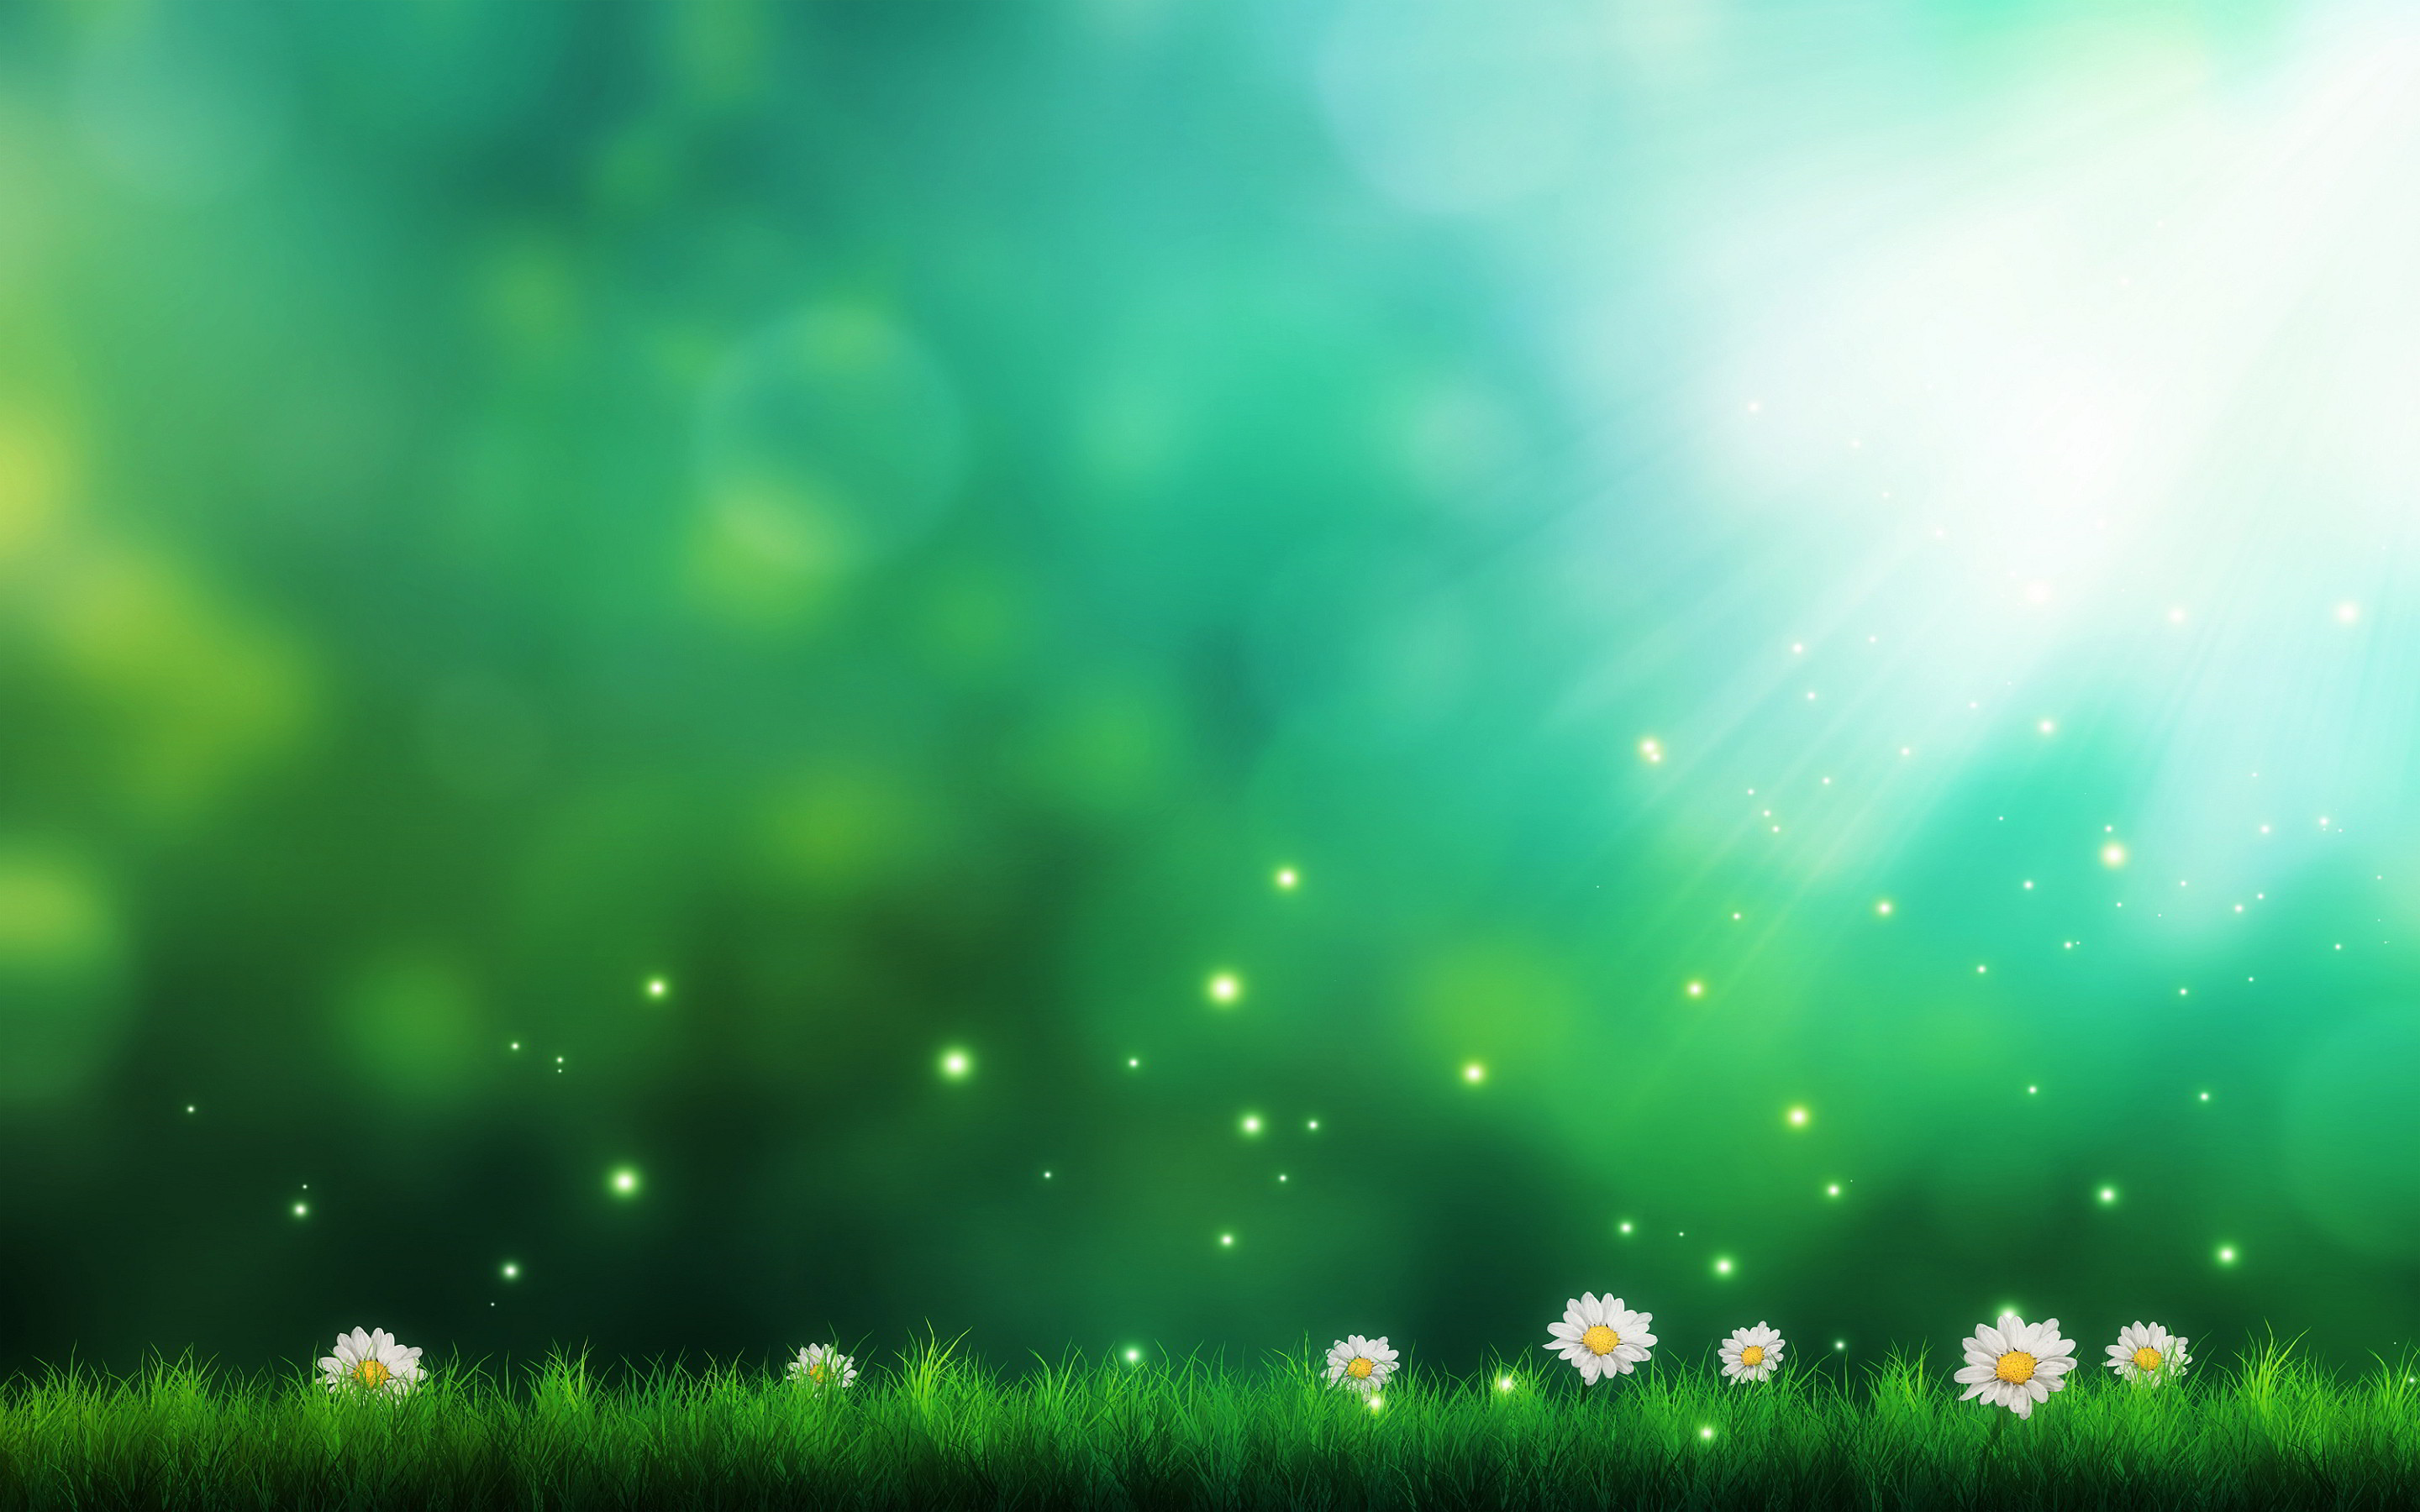 Daisies Green Background Wallpapers Pictures 2880x1800px